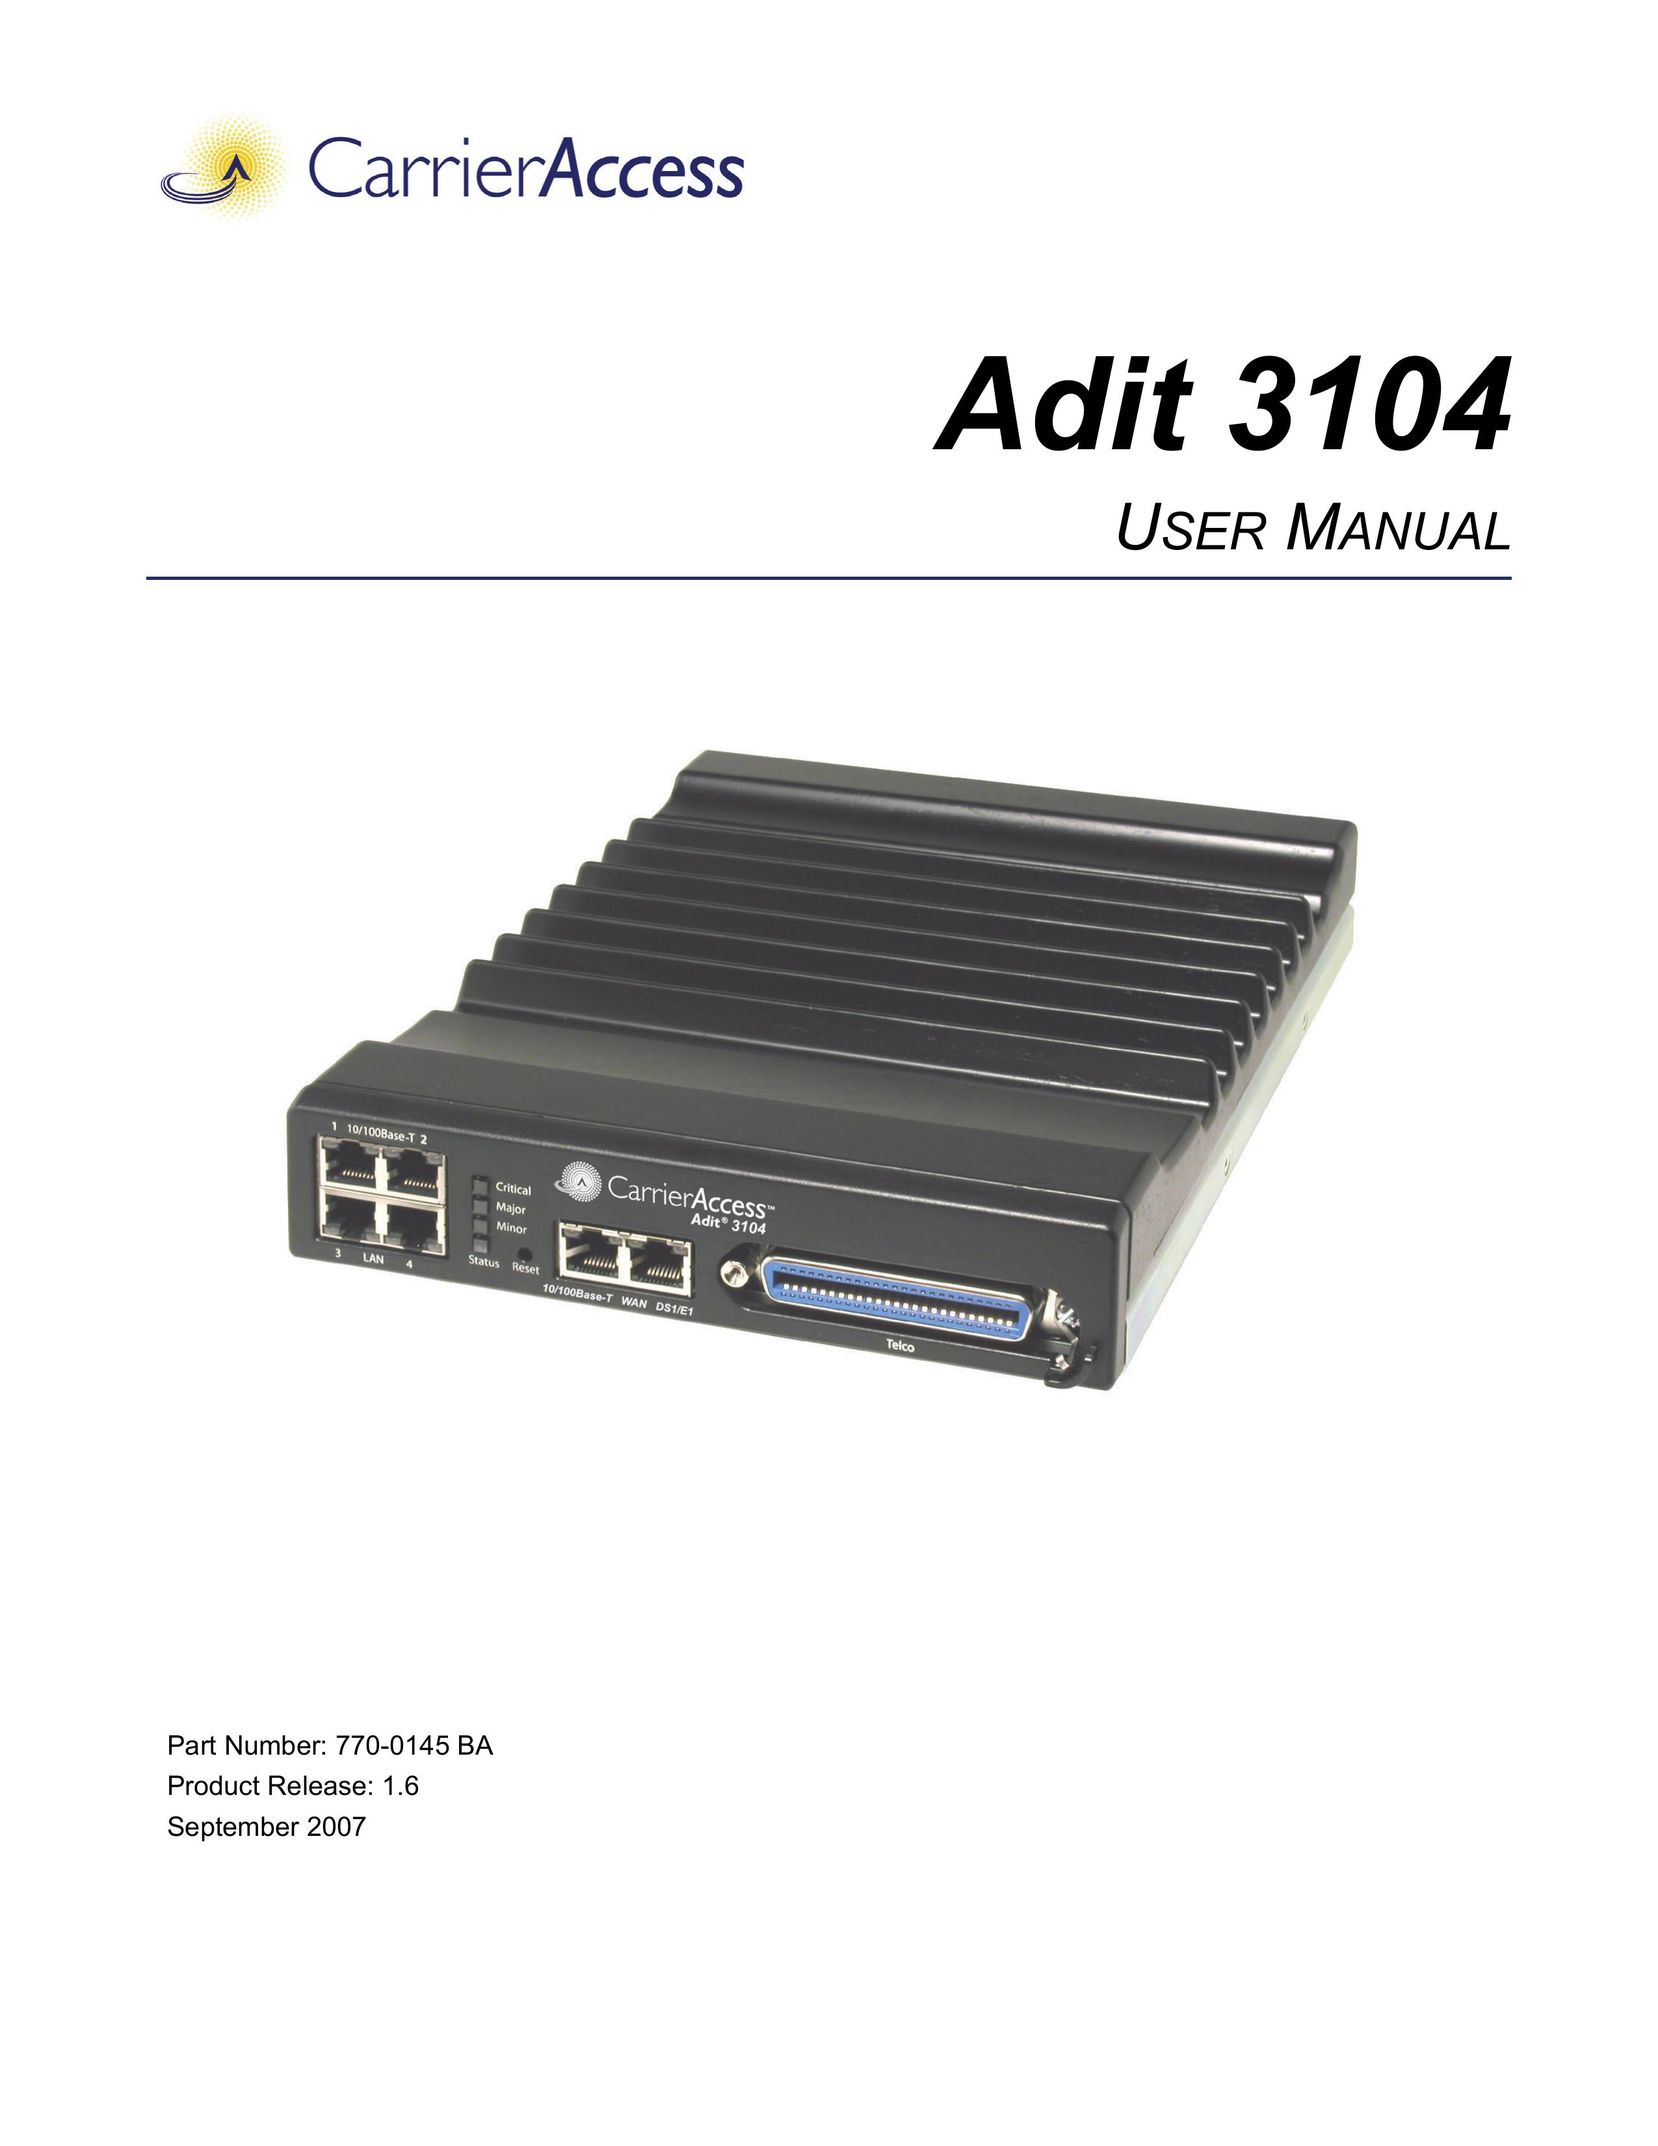 Carrier Access Adit 3104 Network Router User Manual